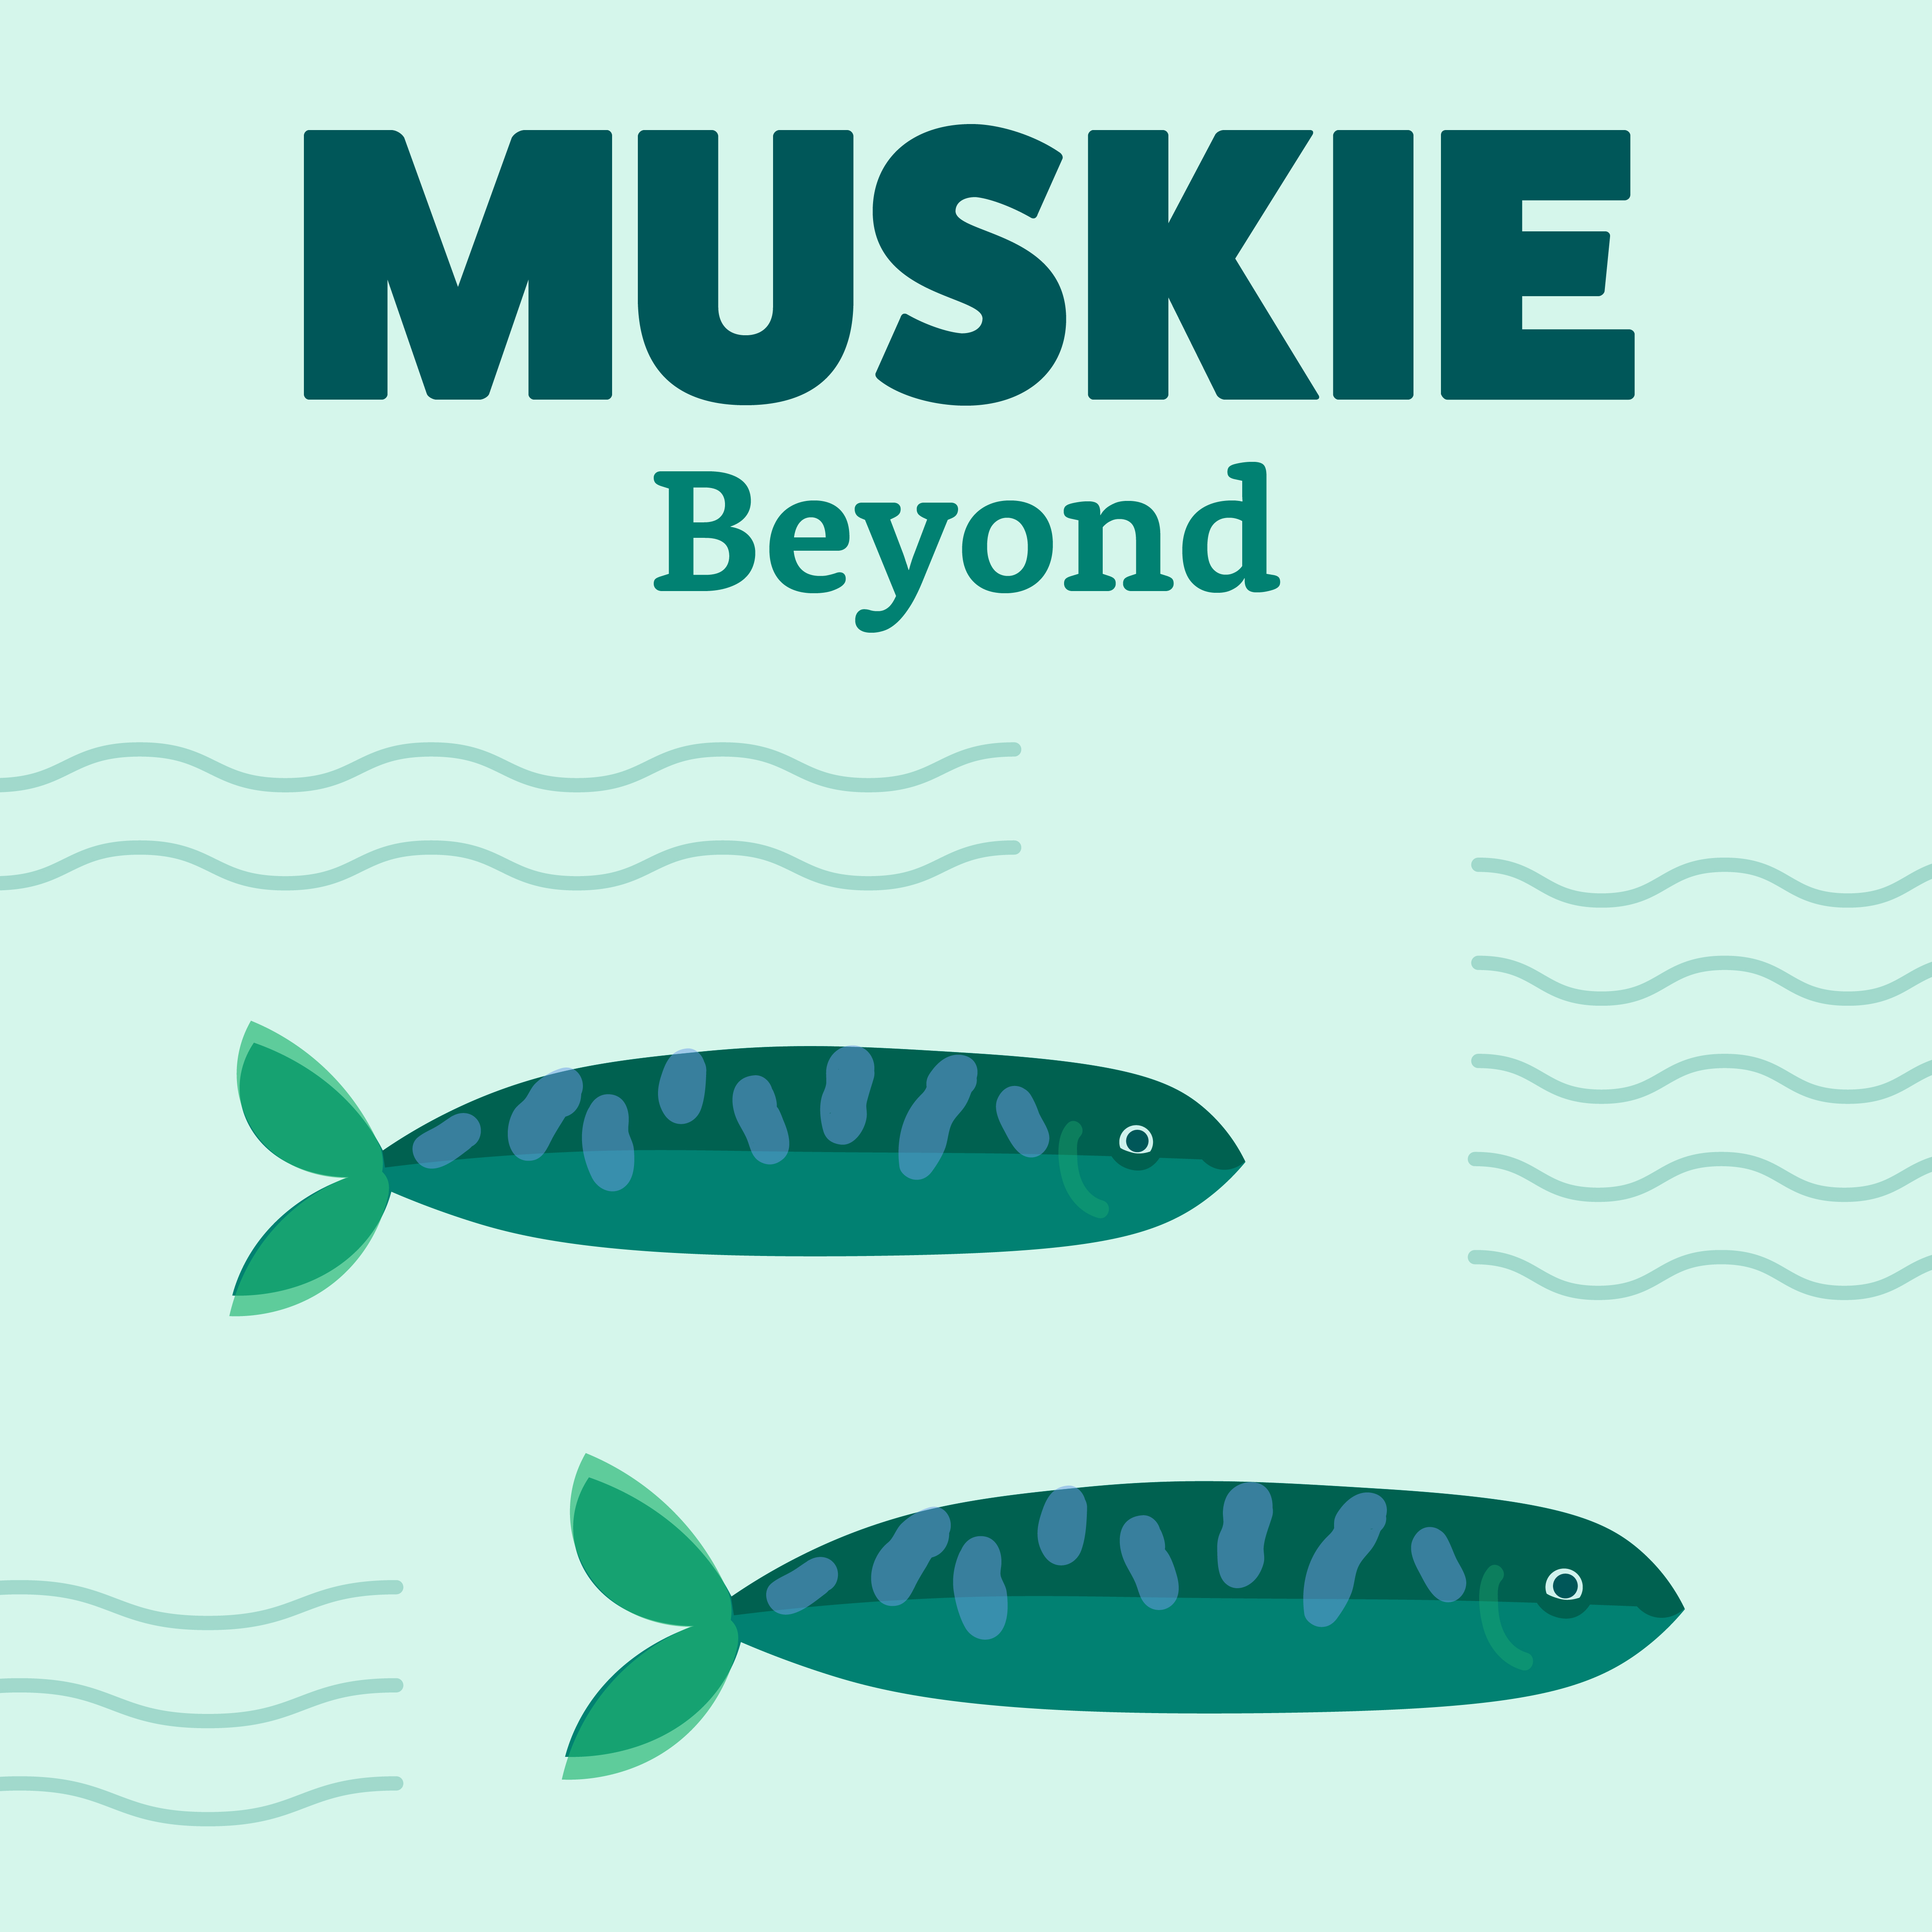 Blue square with two fish with text "Muskie"